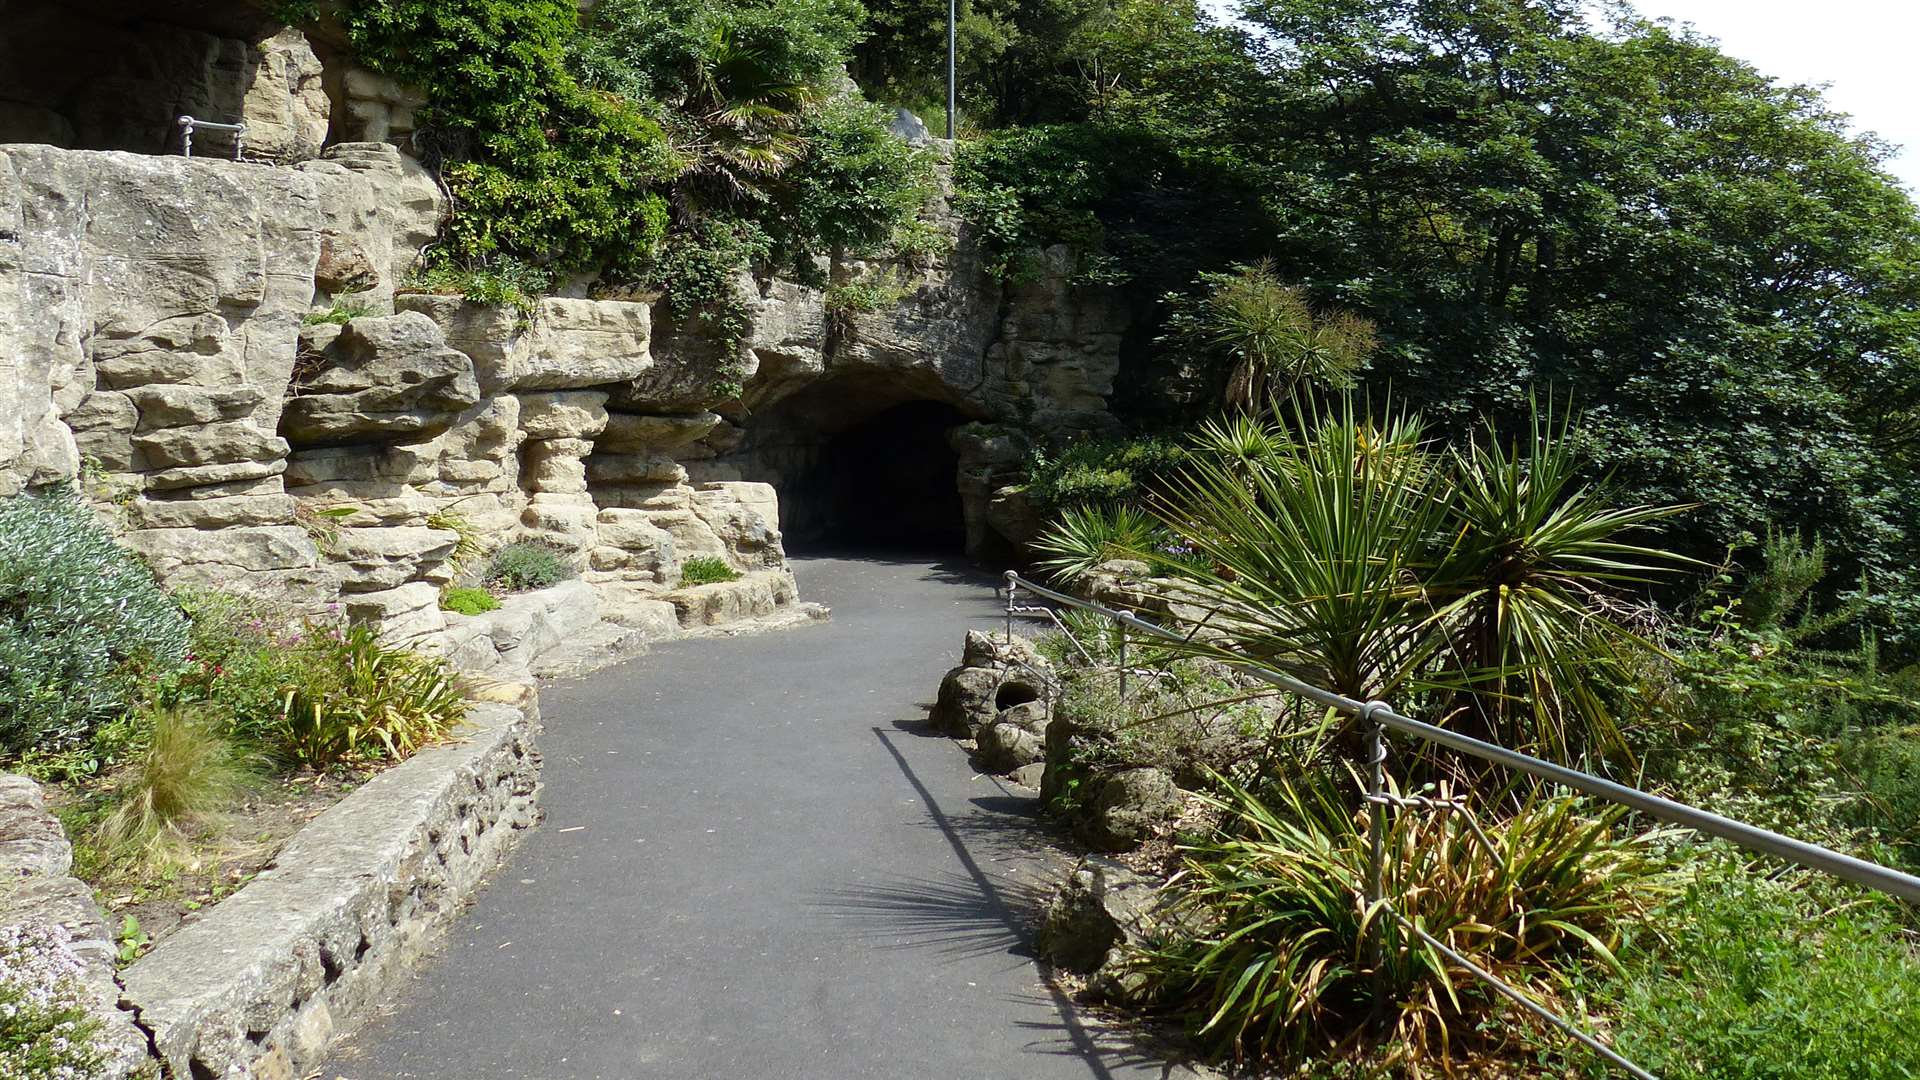 The zig zag path at The Leas